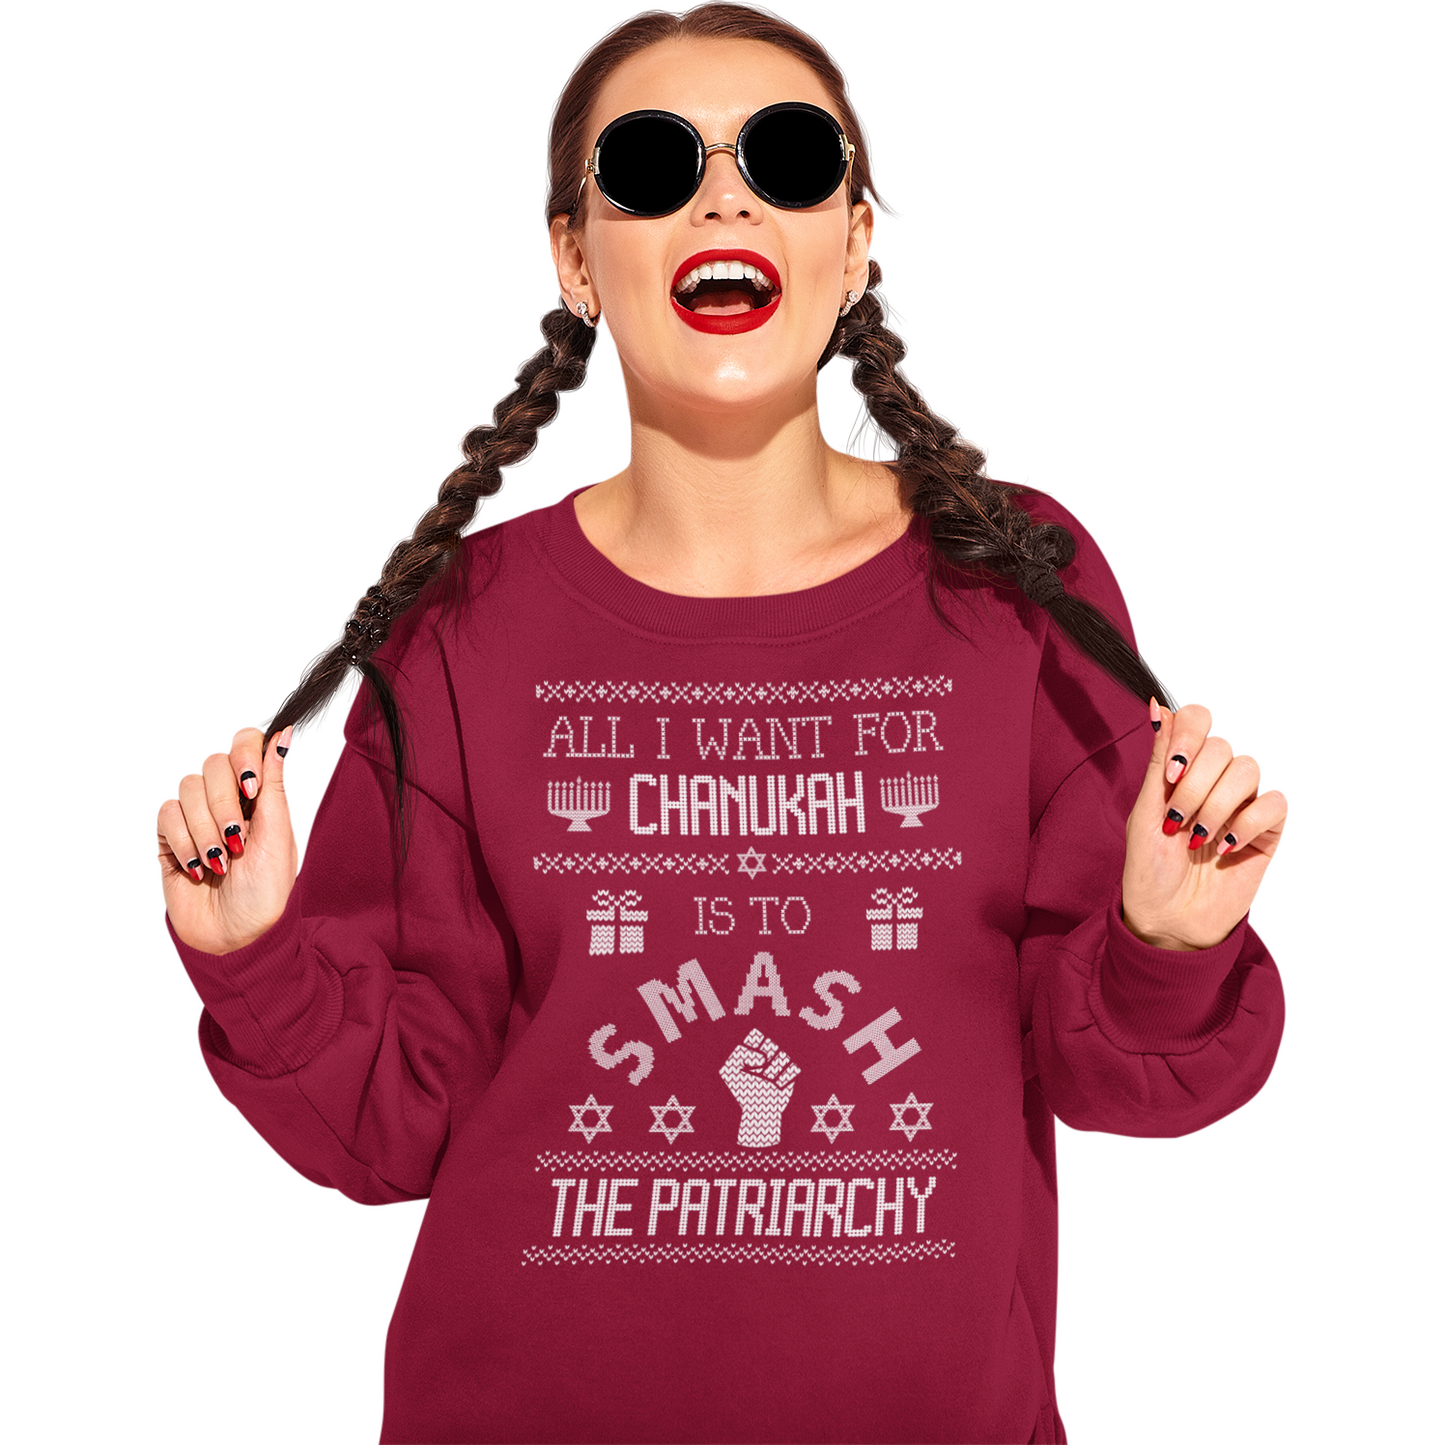 All I Want for Chanukah is to Smash the Patriarchy - Empowering Ugly Sweater Style Sweatshirt